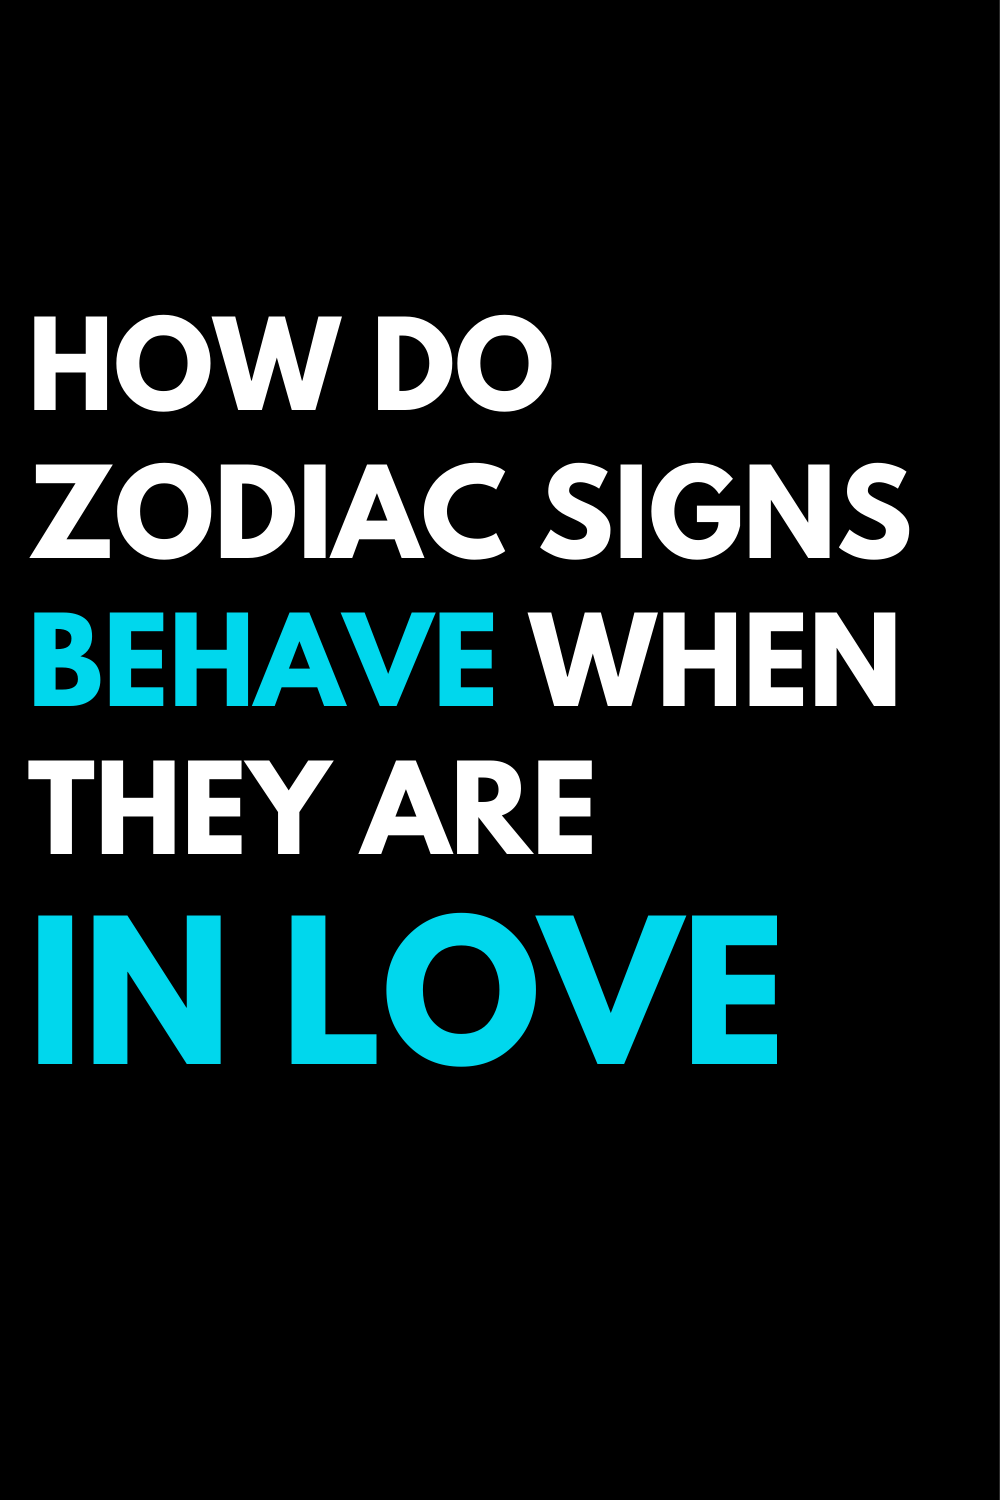 How do zodiac signs behave when they are in love